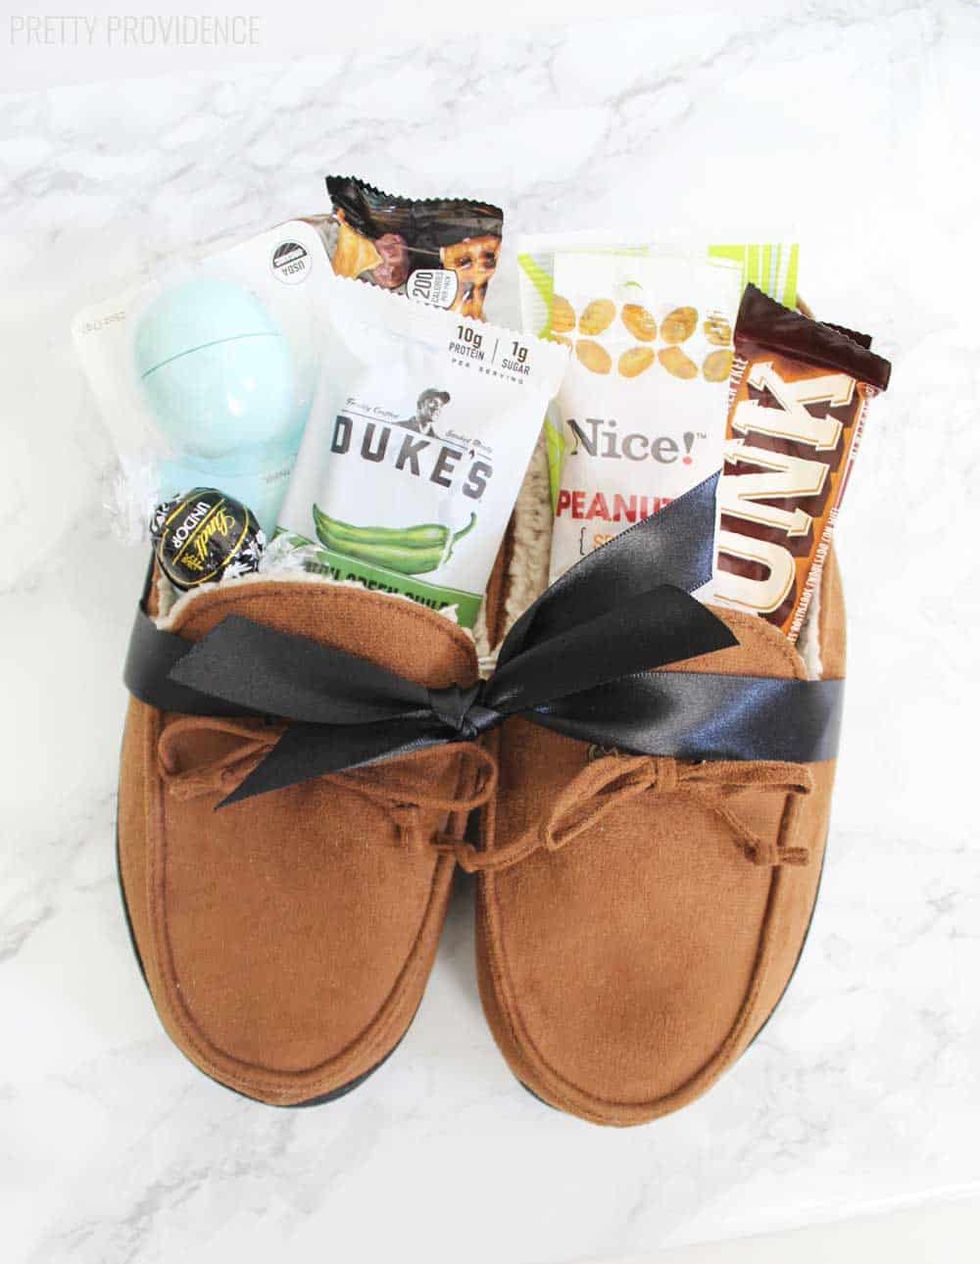 leather moccasin slippers tied with ribbon and filled with snacks